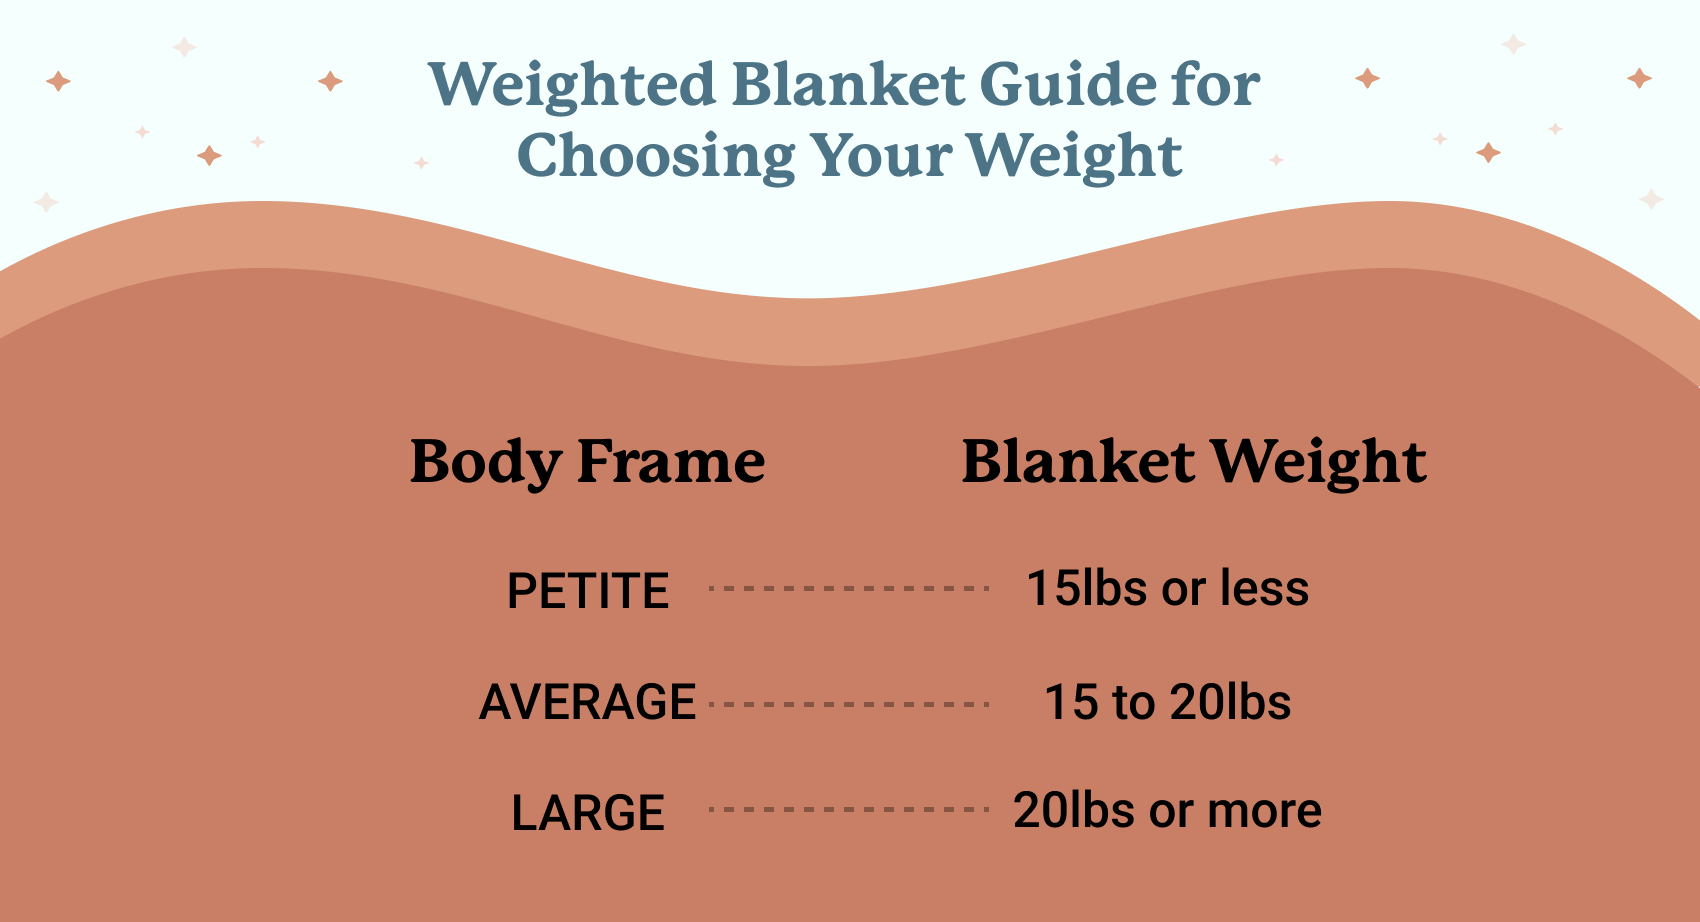 A weighted blanket chart showing the best weight based on body type for individual adults